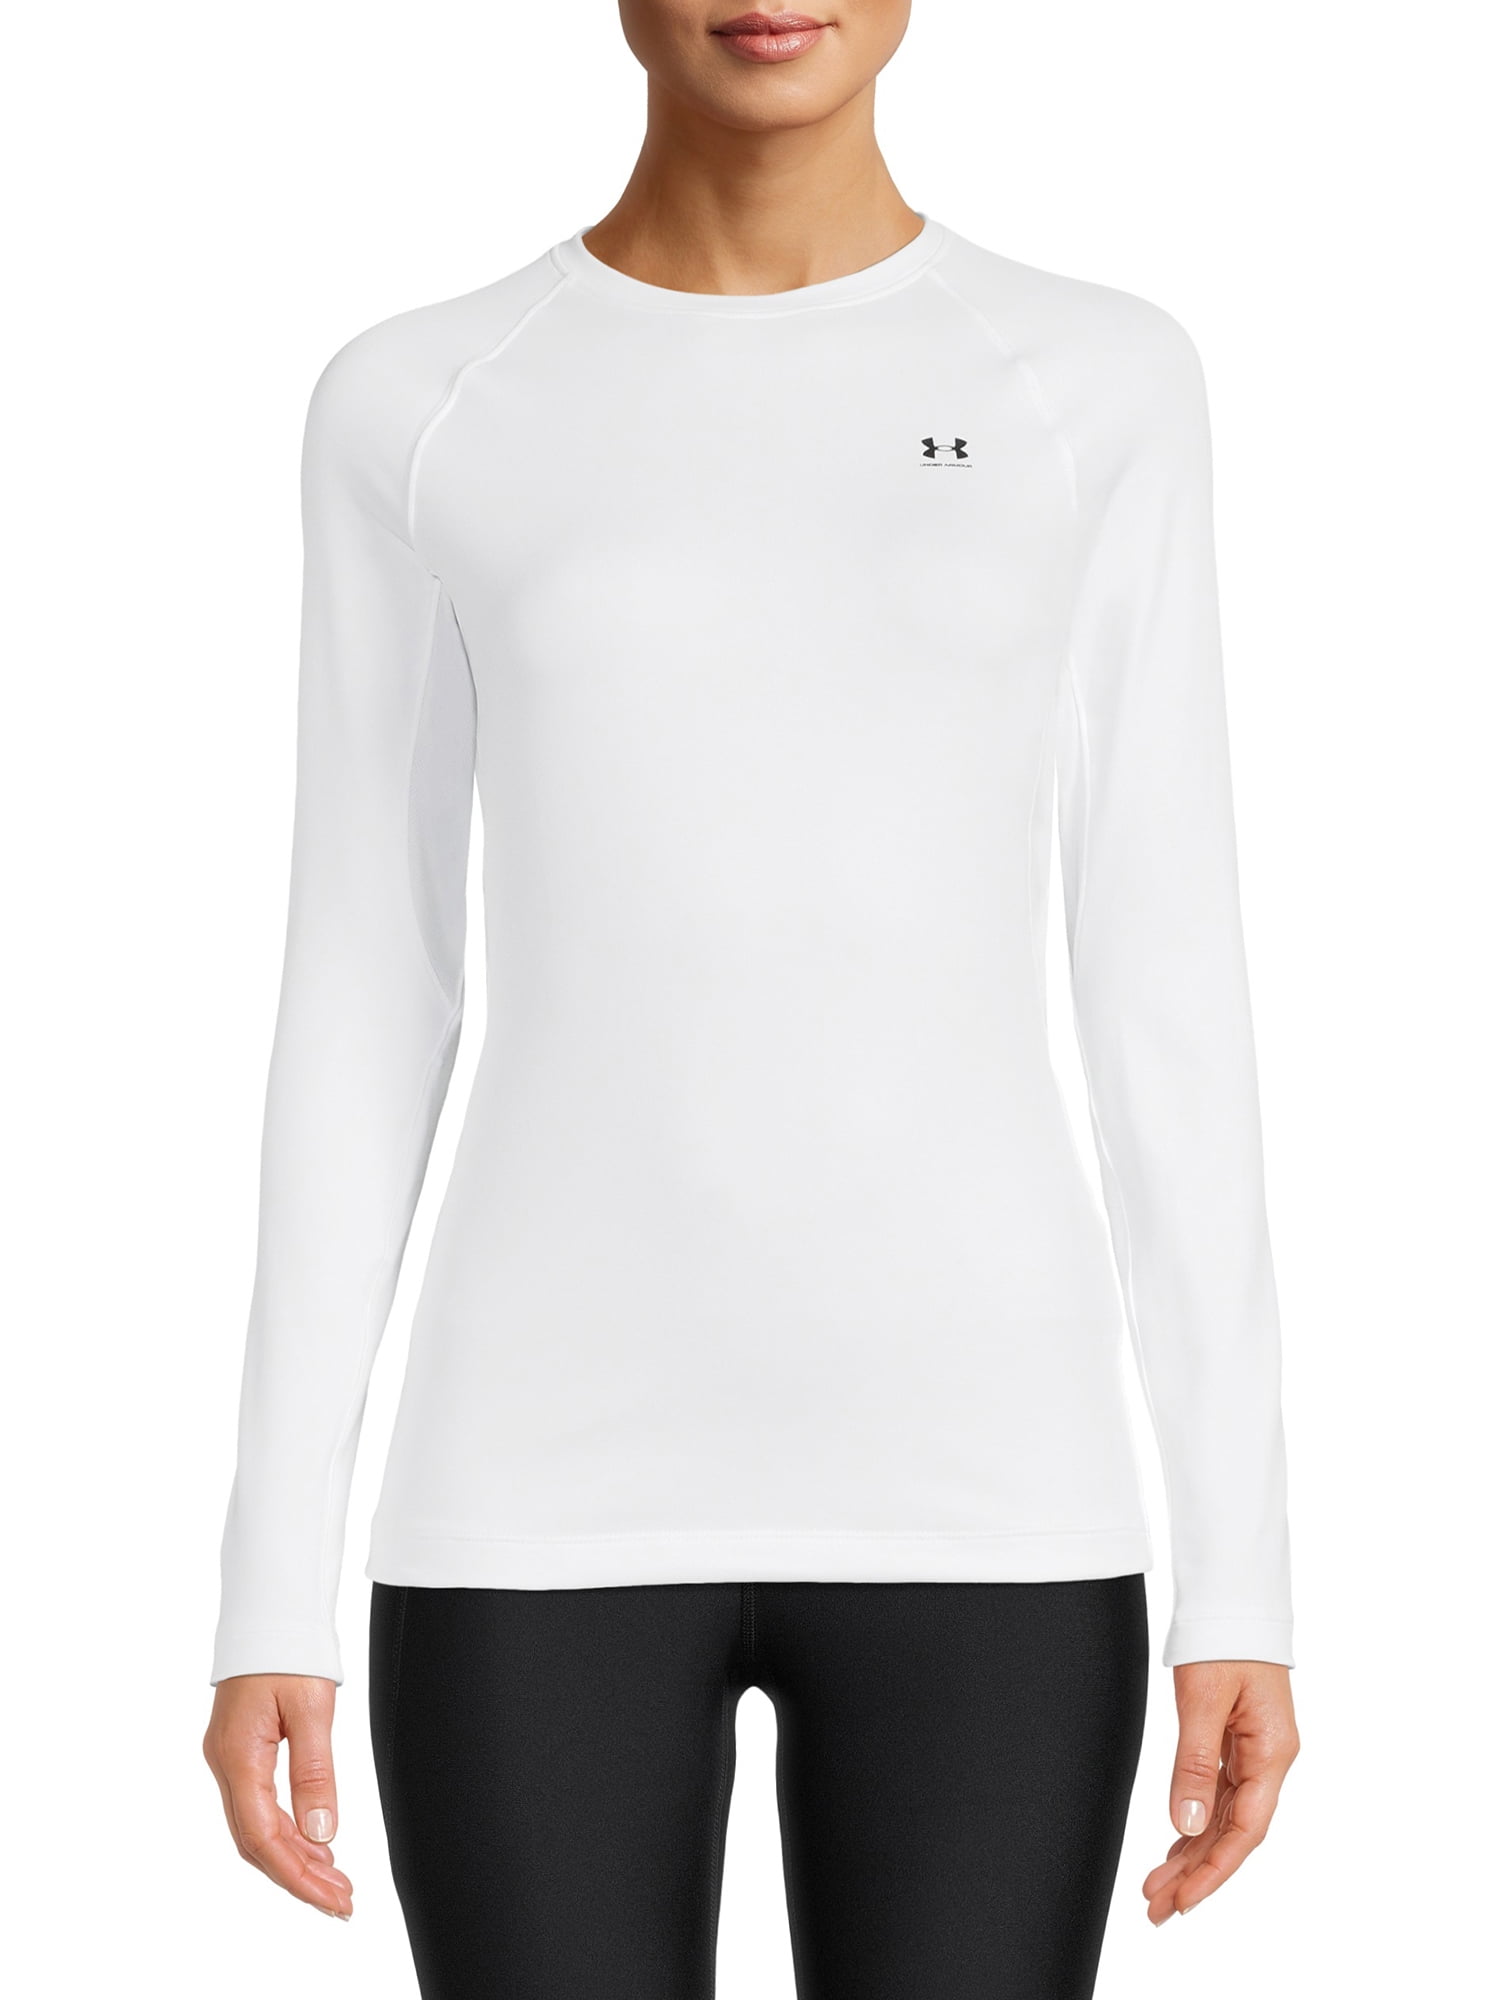 Under Armour Women's Authentic Crew T-Shirt with Long Sleeves 